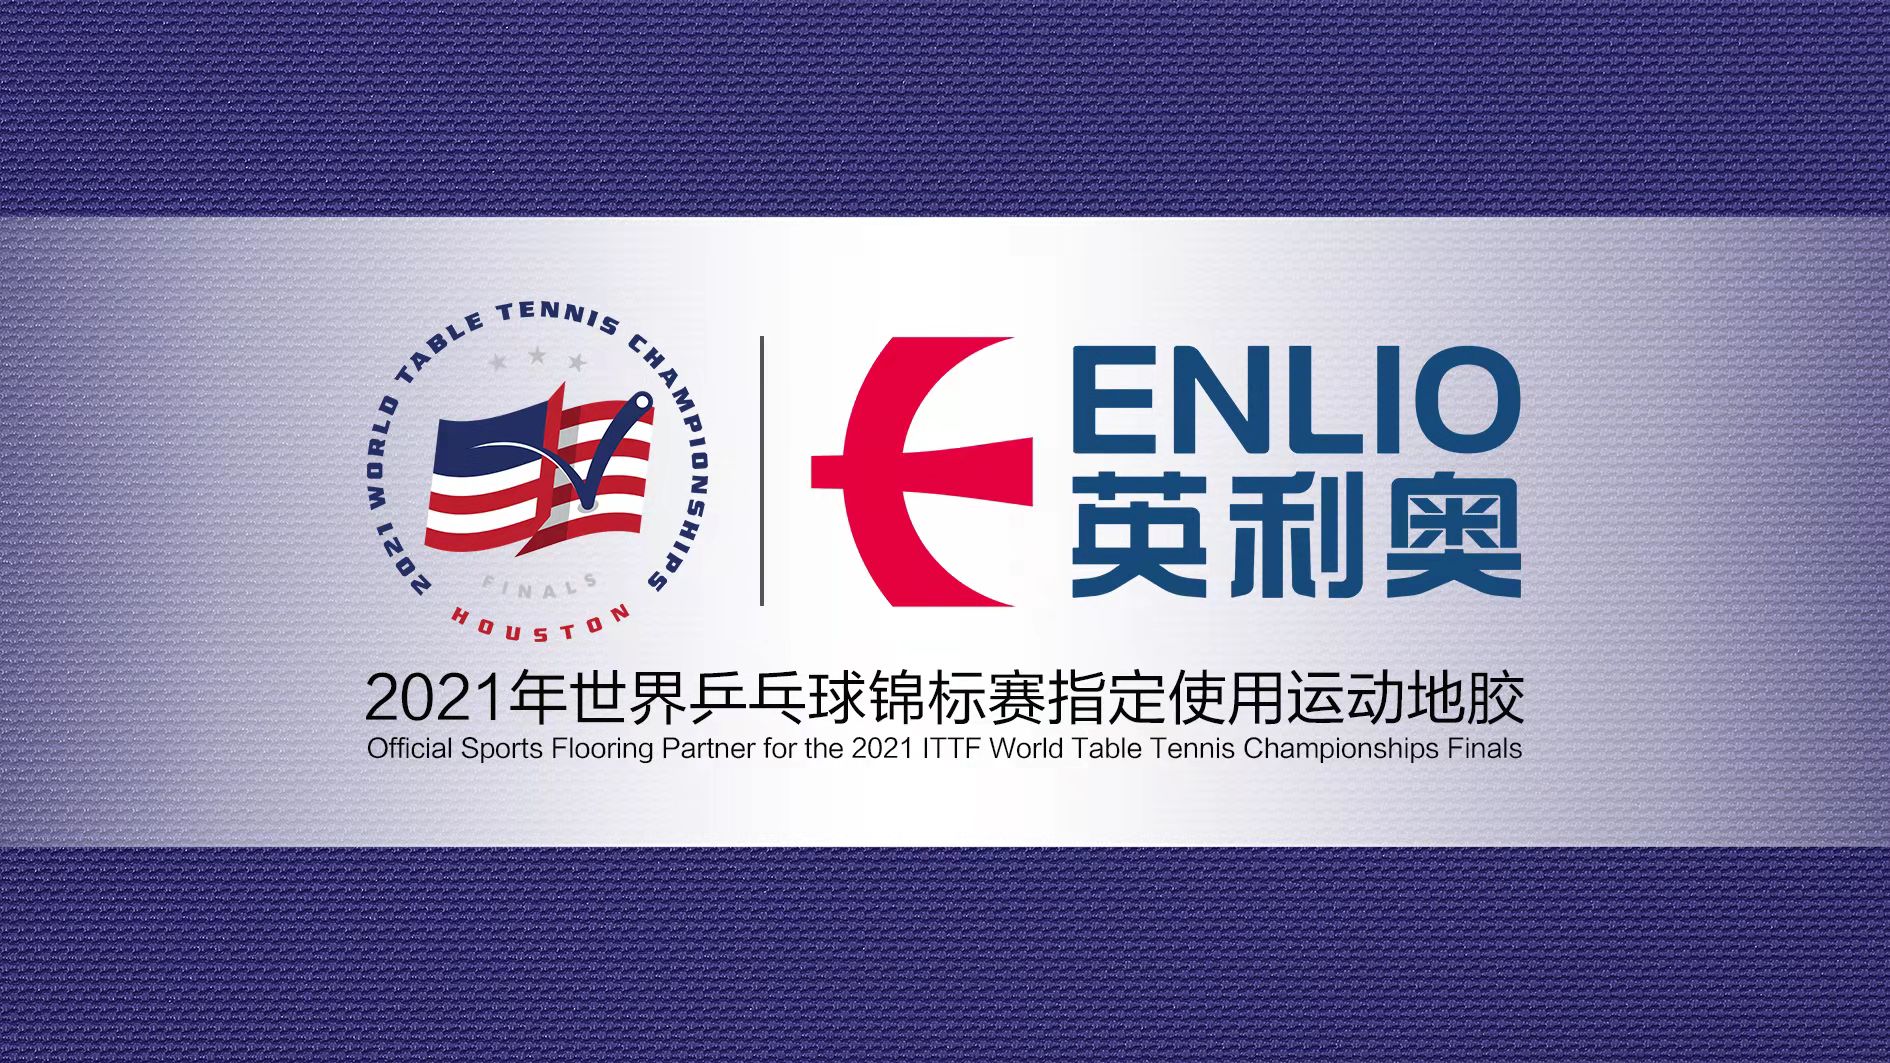 Enlio Becomes Official Flooring Supplier of 2021 World Table Tennis Championships and WTT Cup Finals